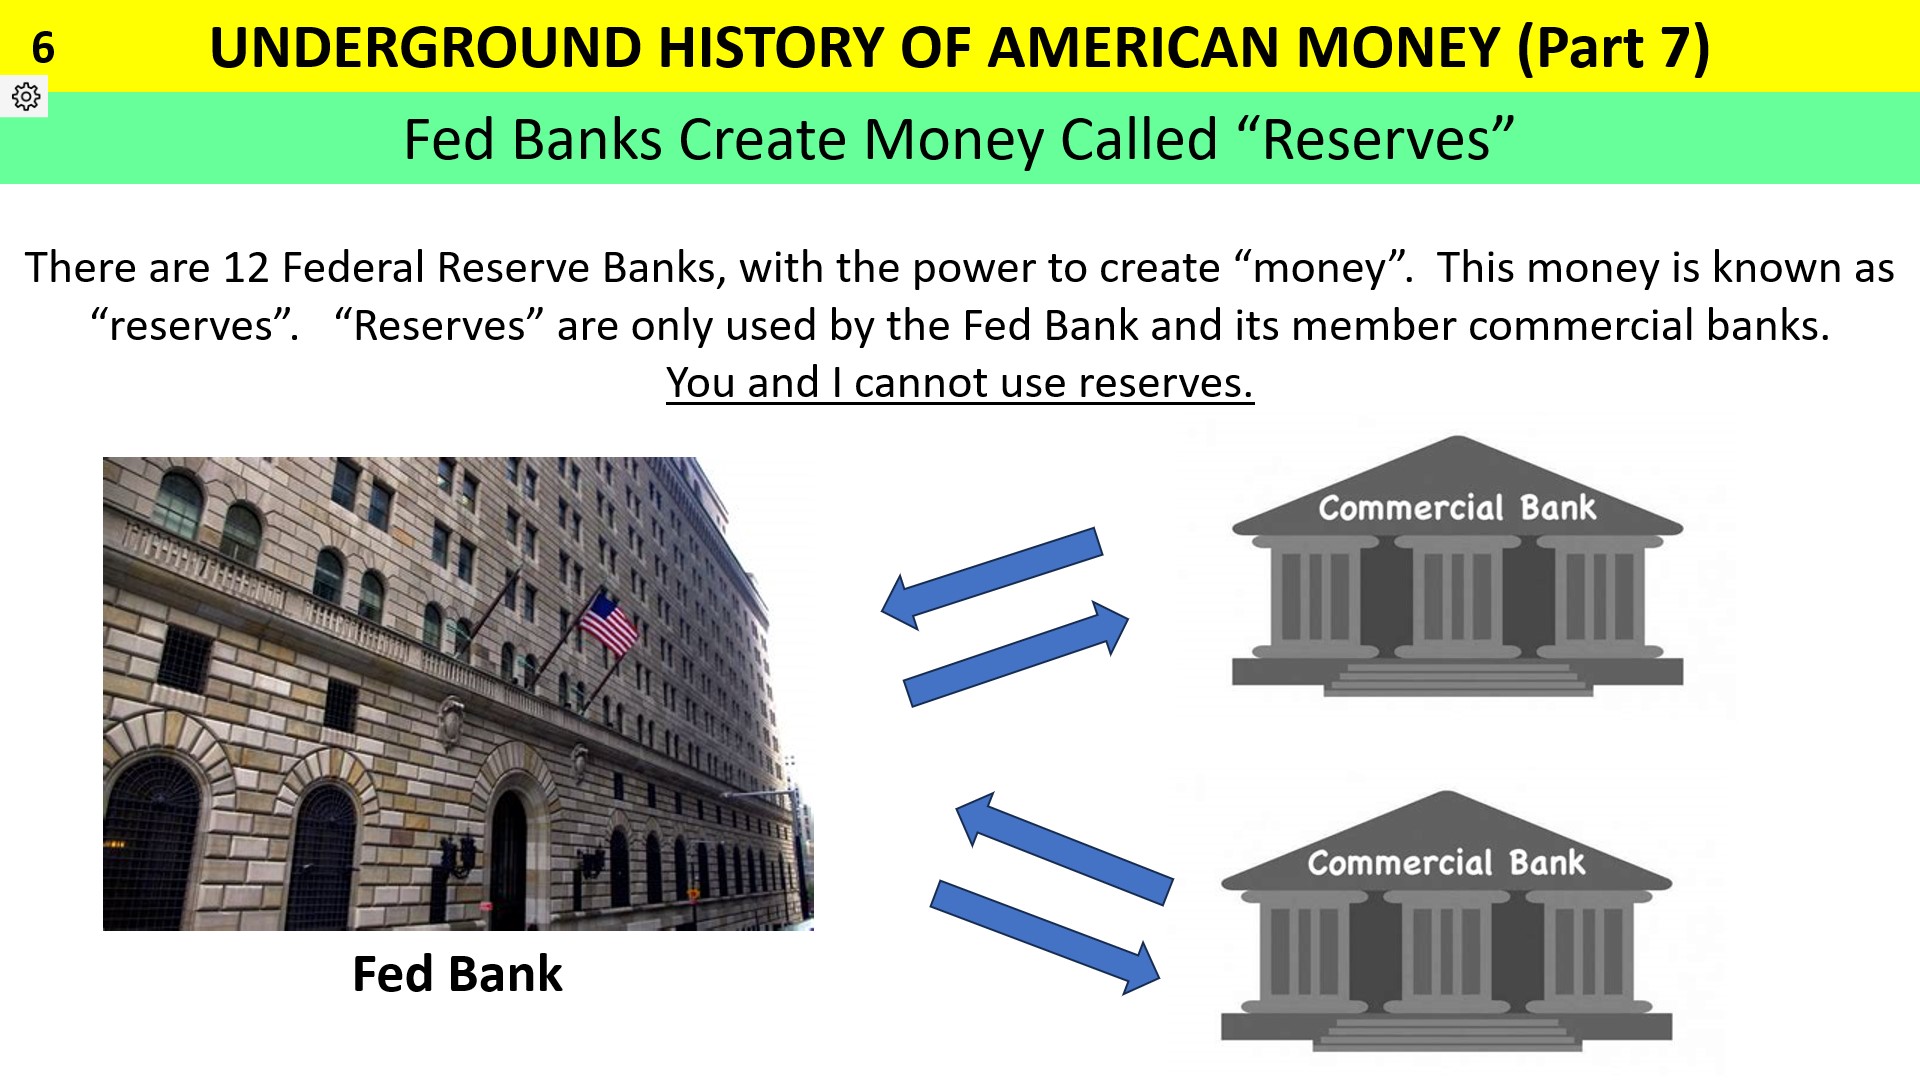 Federal reserve banks create reserves used only within the banking system.